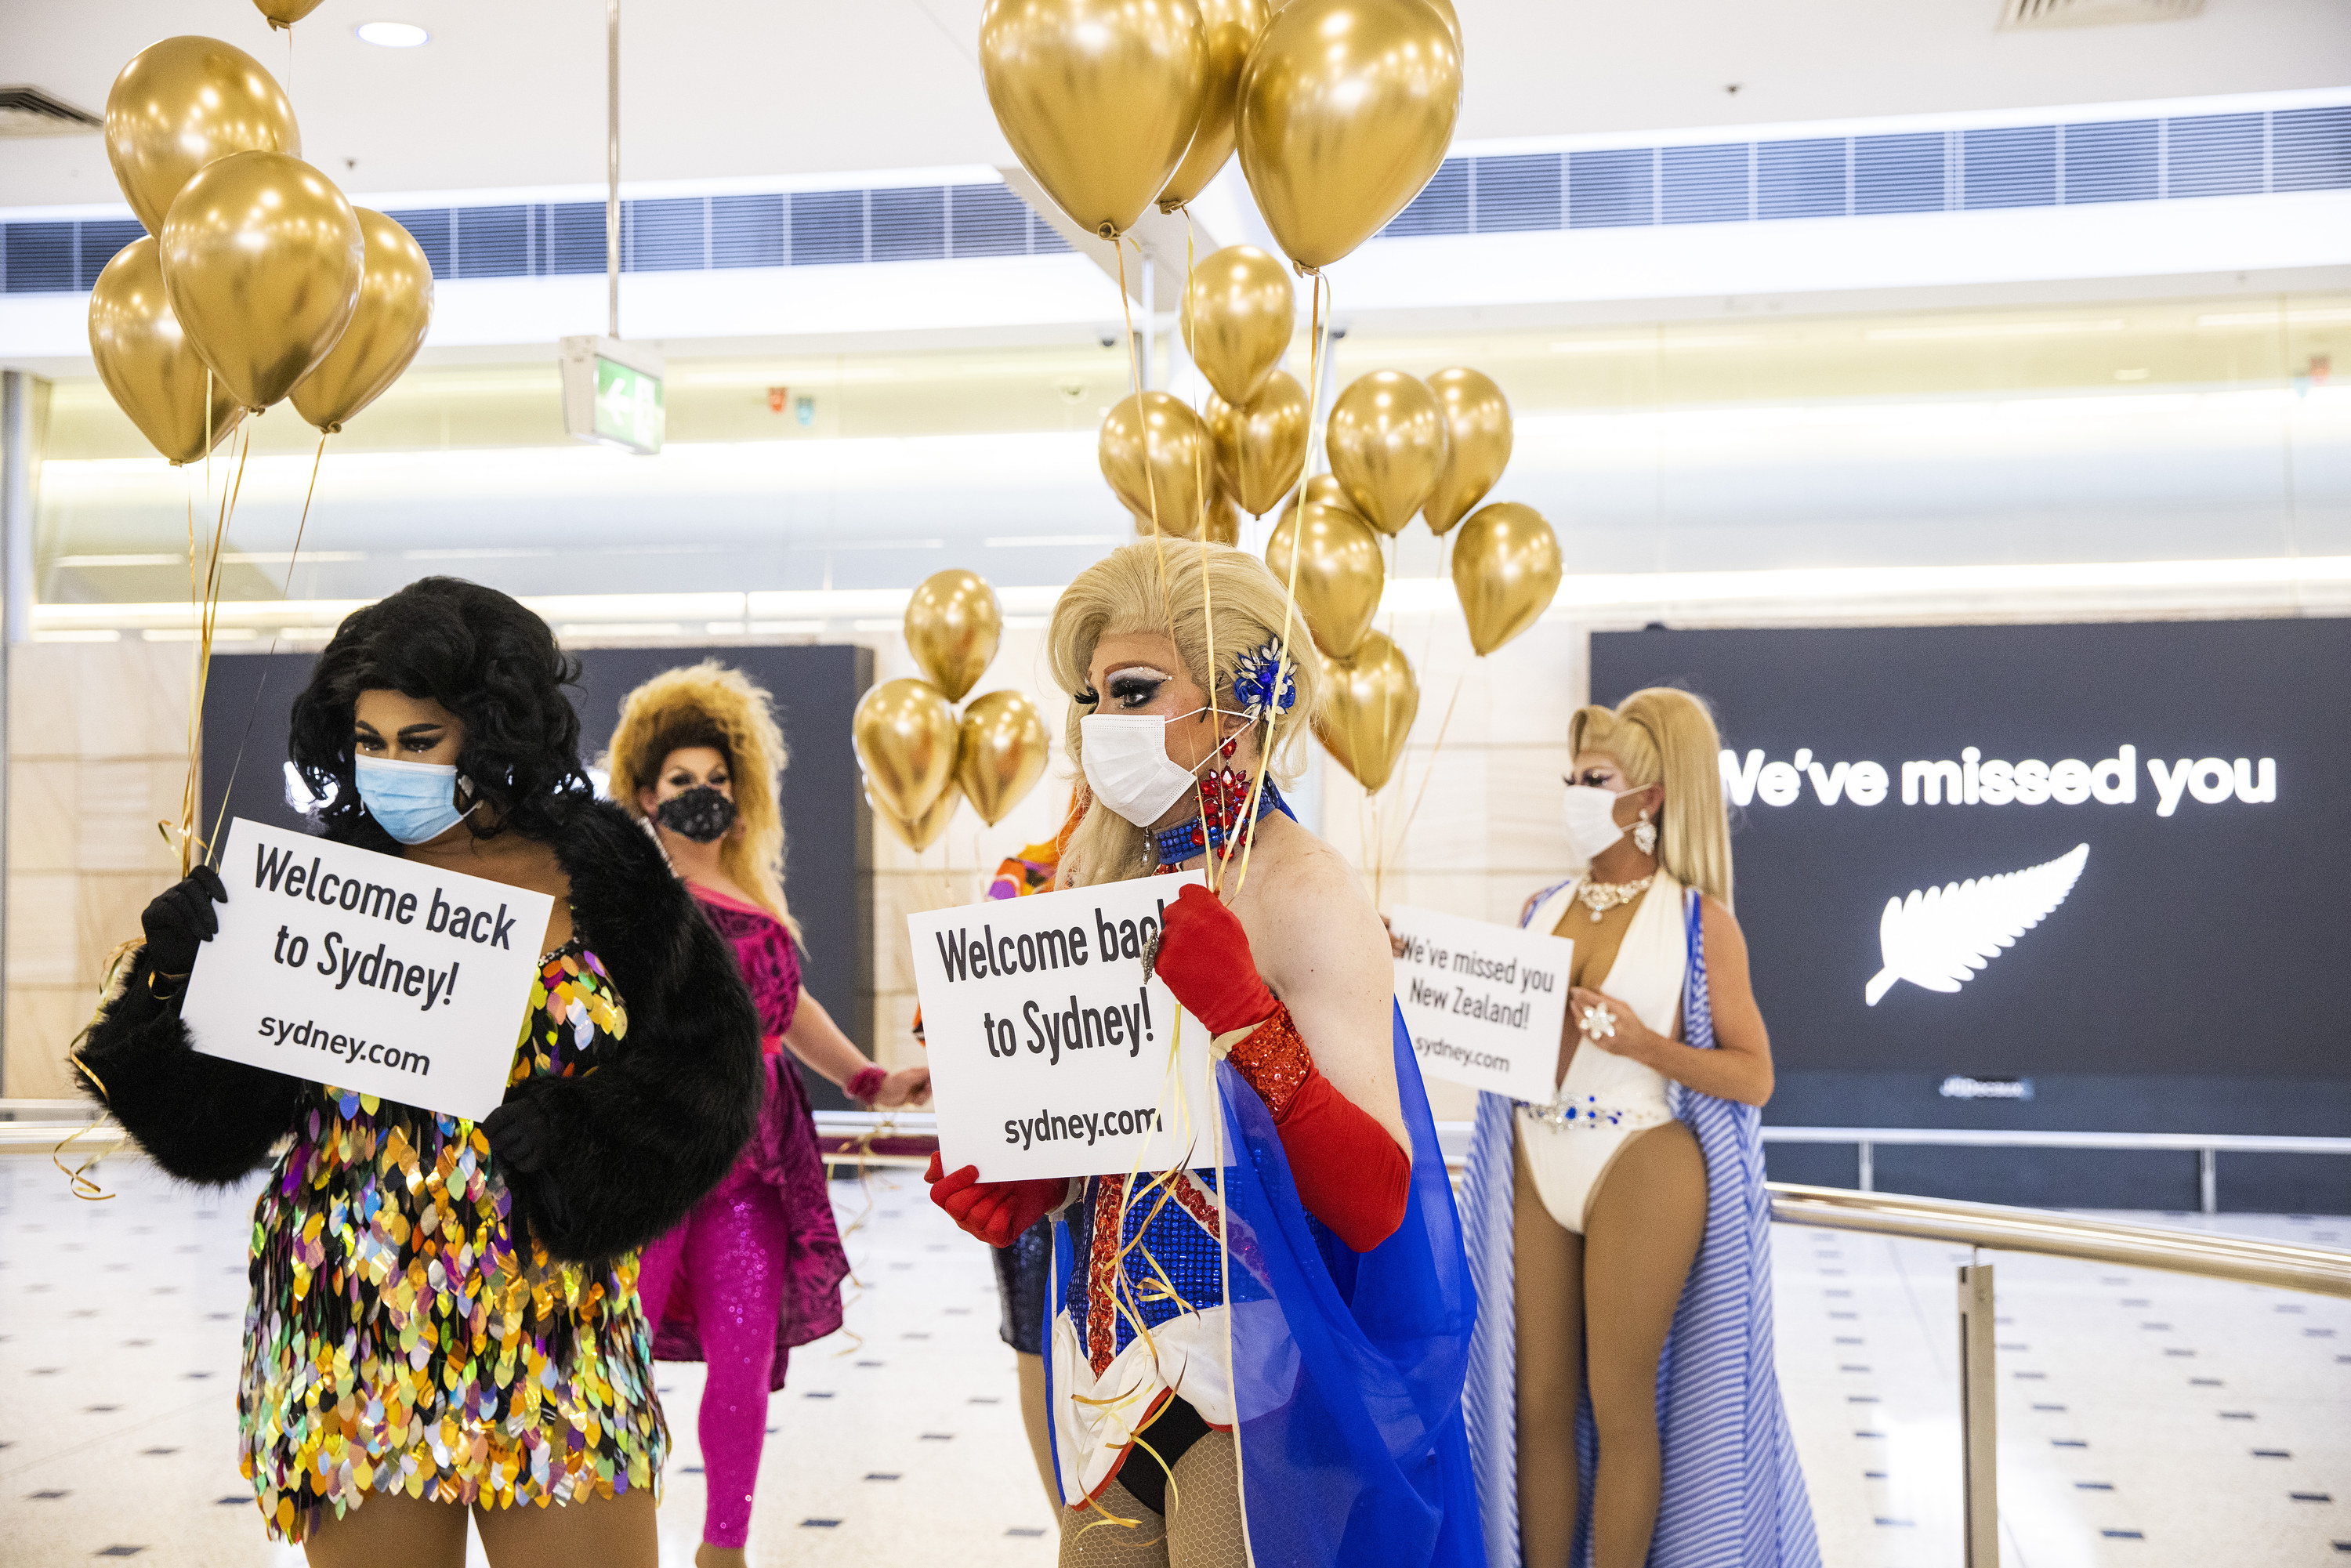 Drag queens holding signs that say &quot;welcome back to Sydney!&quot; and balloons